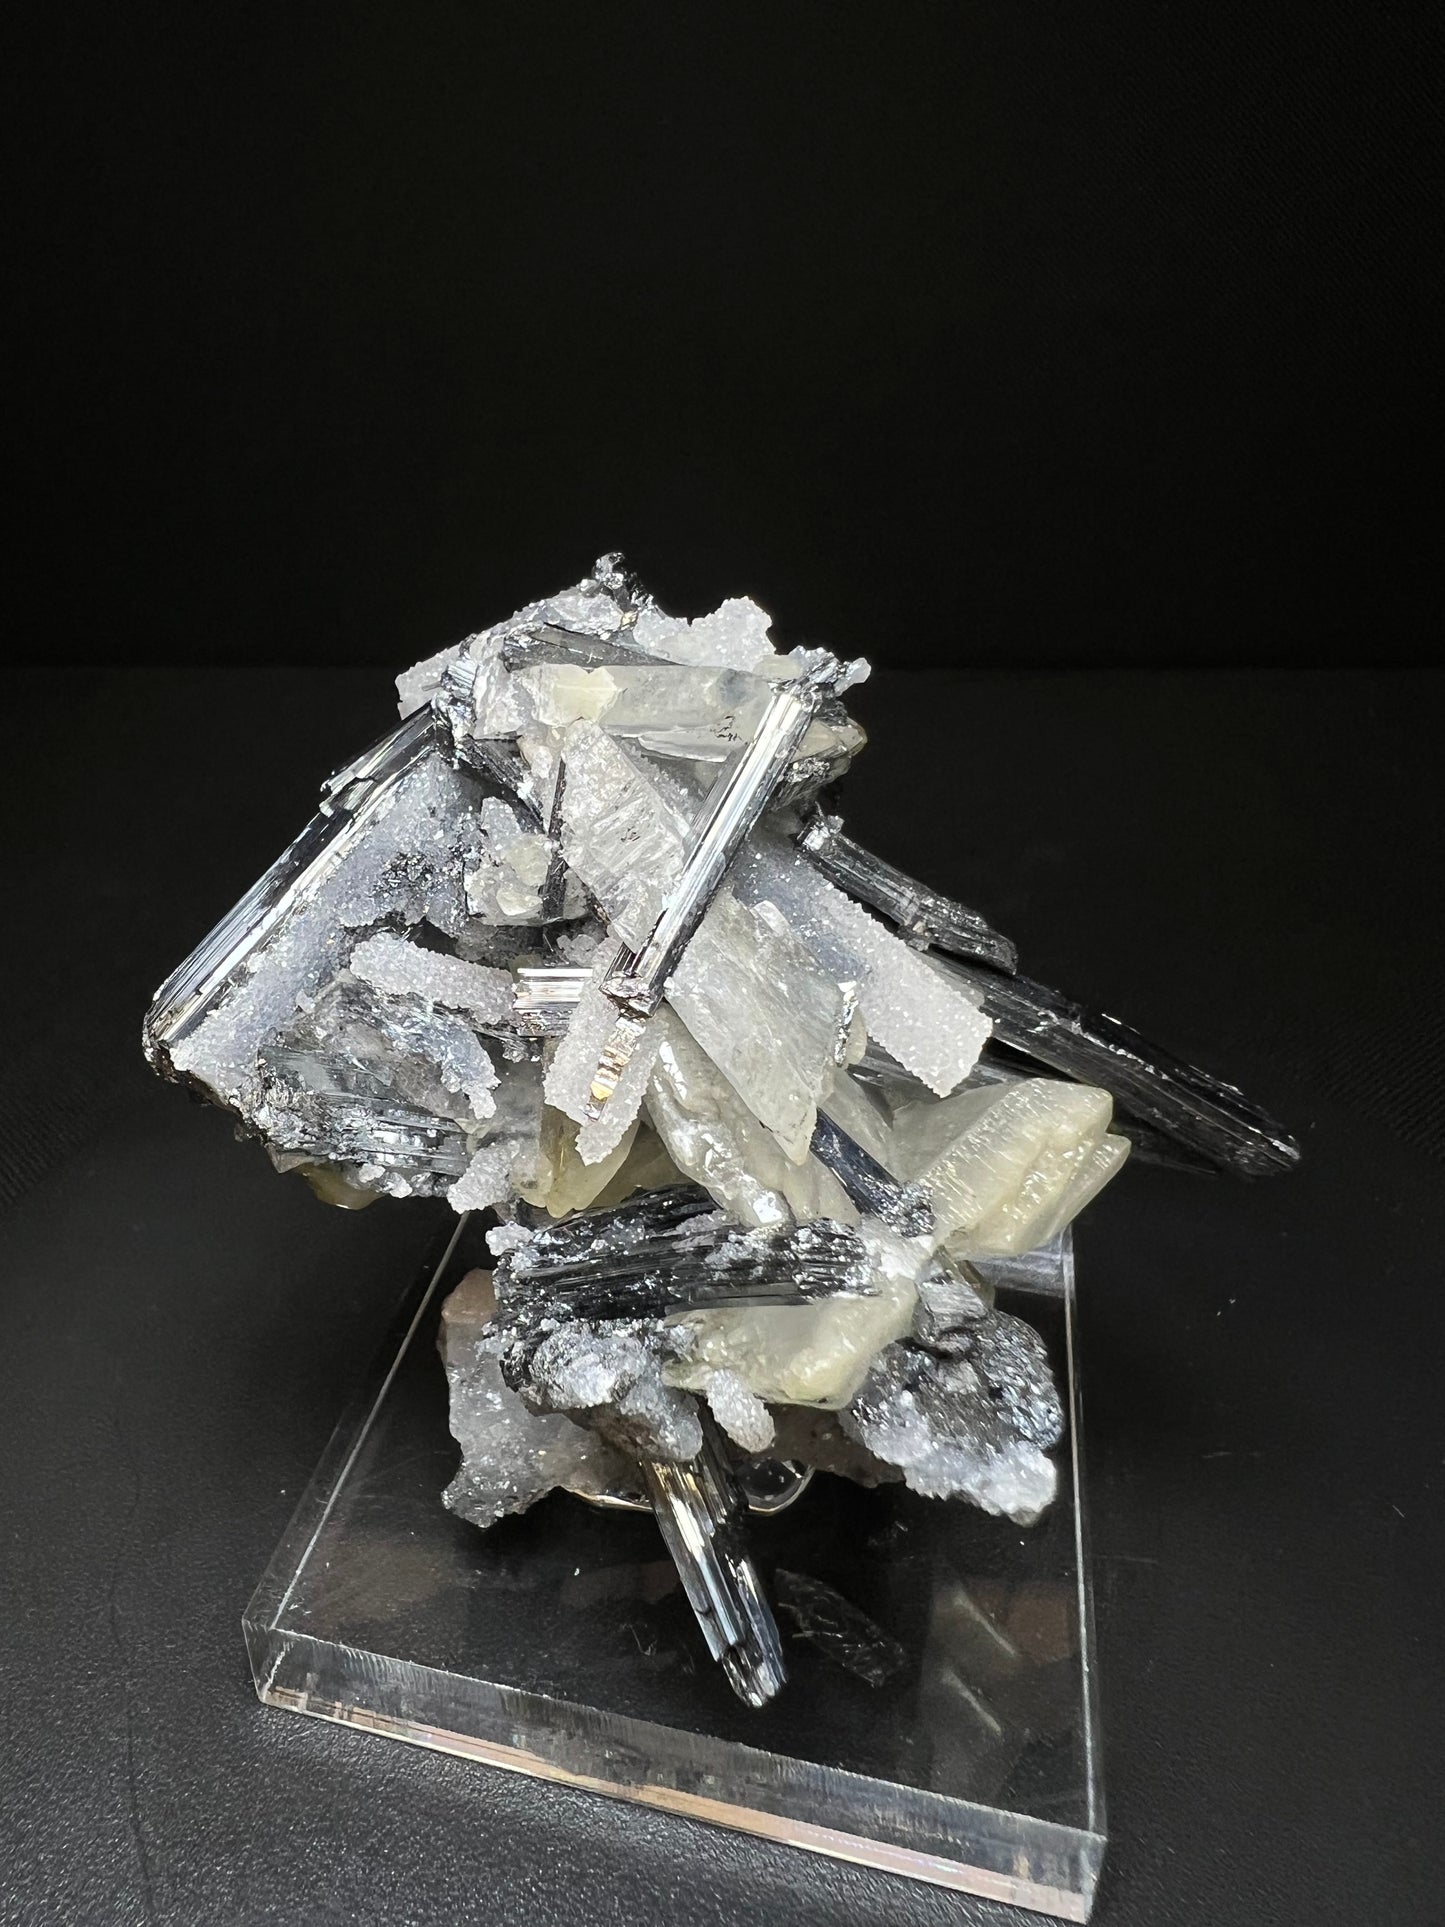 Outstanding Formation Of Stibnite With Barite - Collectors Piece, Crystal Healing, Mineral, Specimen